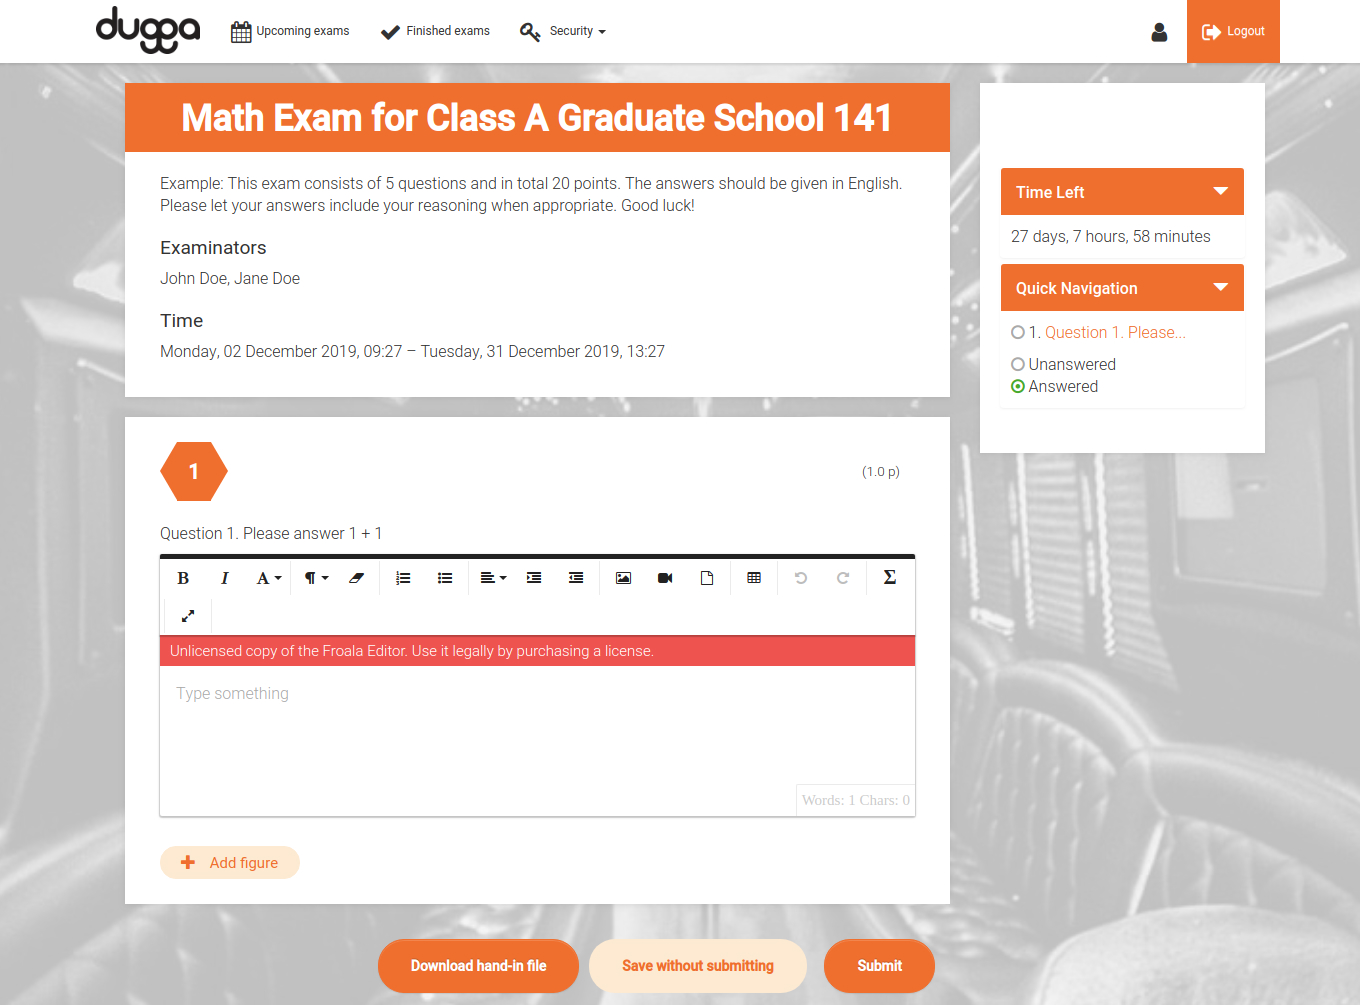 Dugga’s 7,000 plus student users take their exams on a user-friendly and responsive platform.